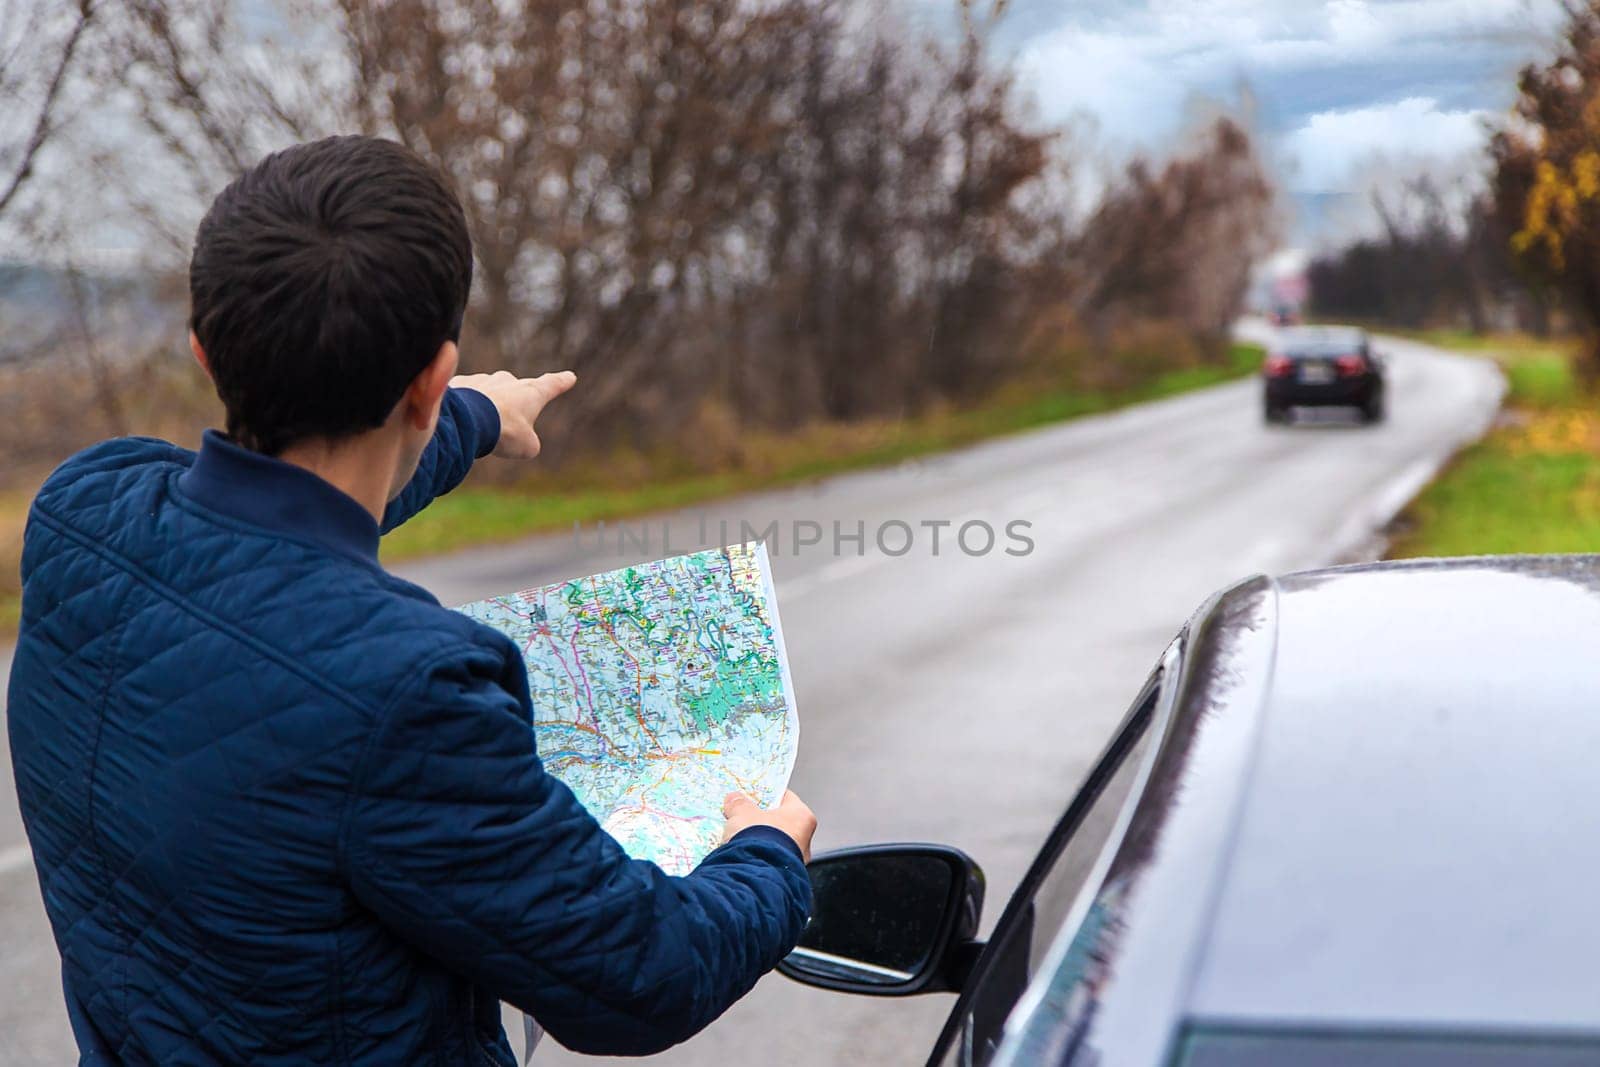 A man looks at a map on the road. Selective focus. People.